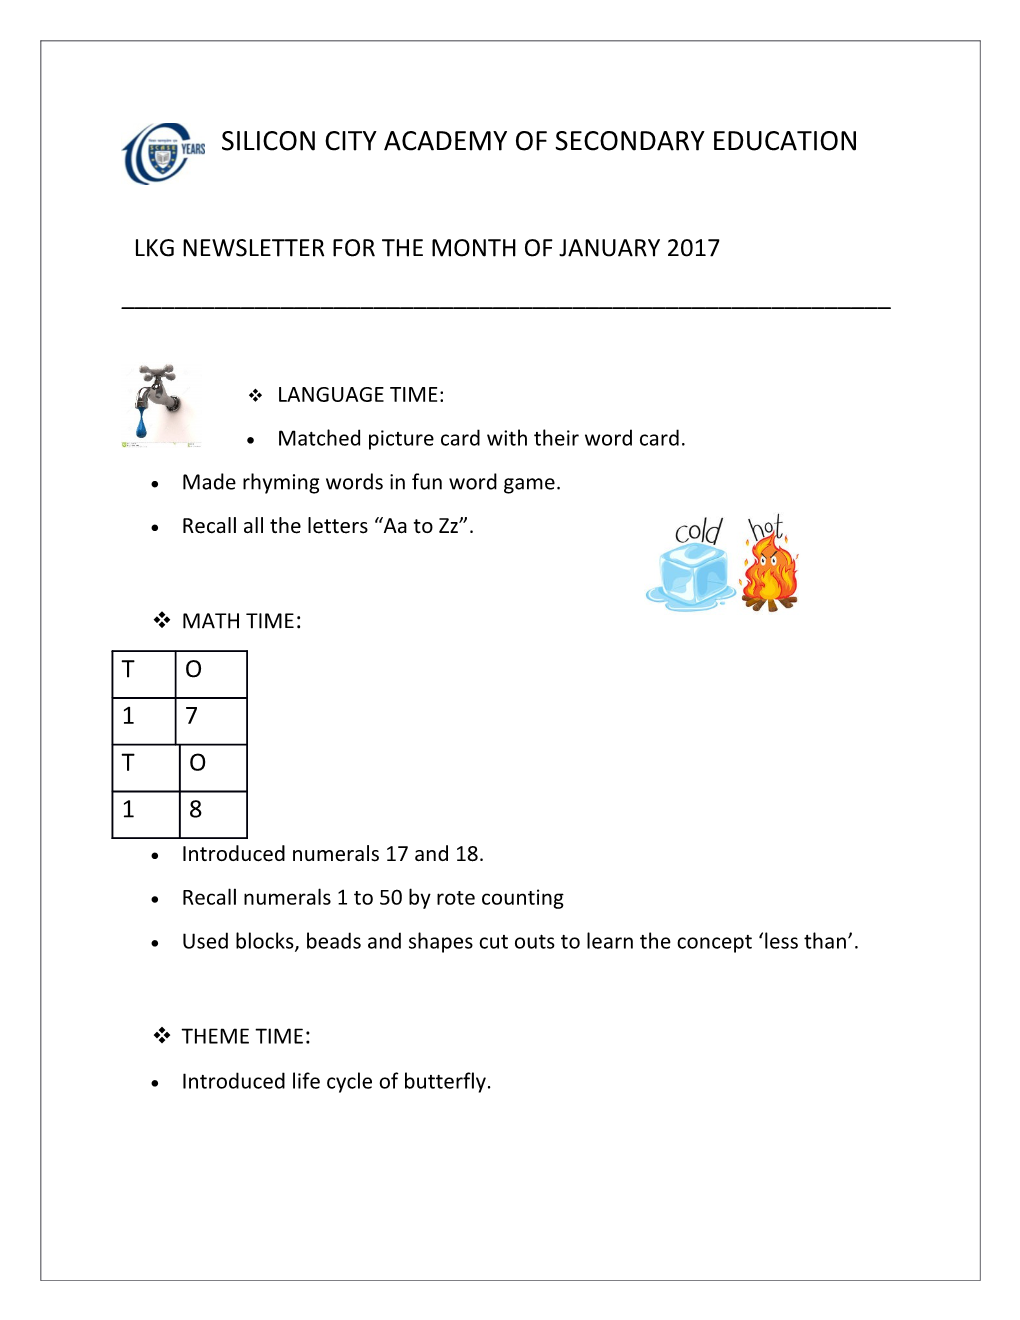 Lkg Newsletter for the Month of January 2017